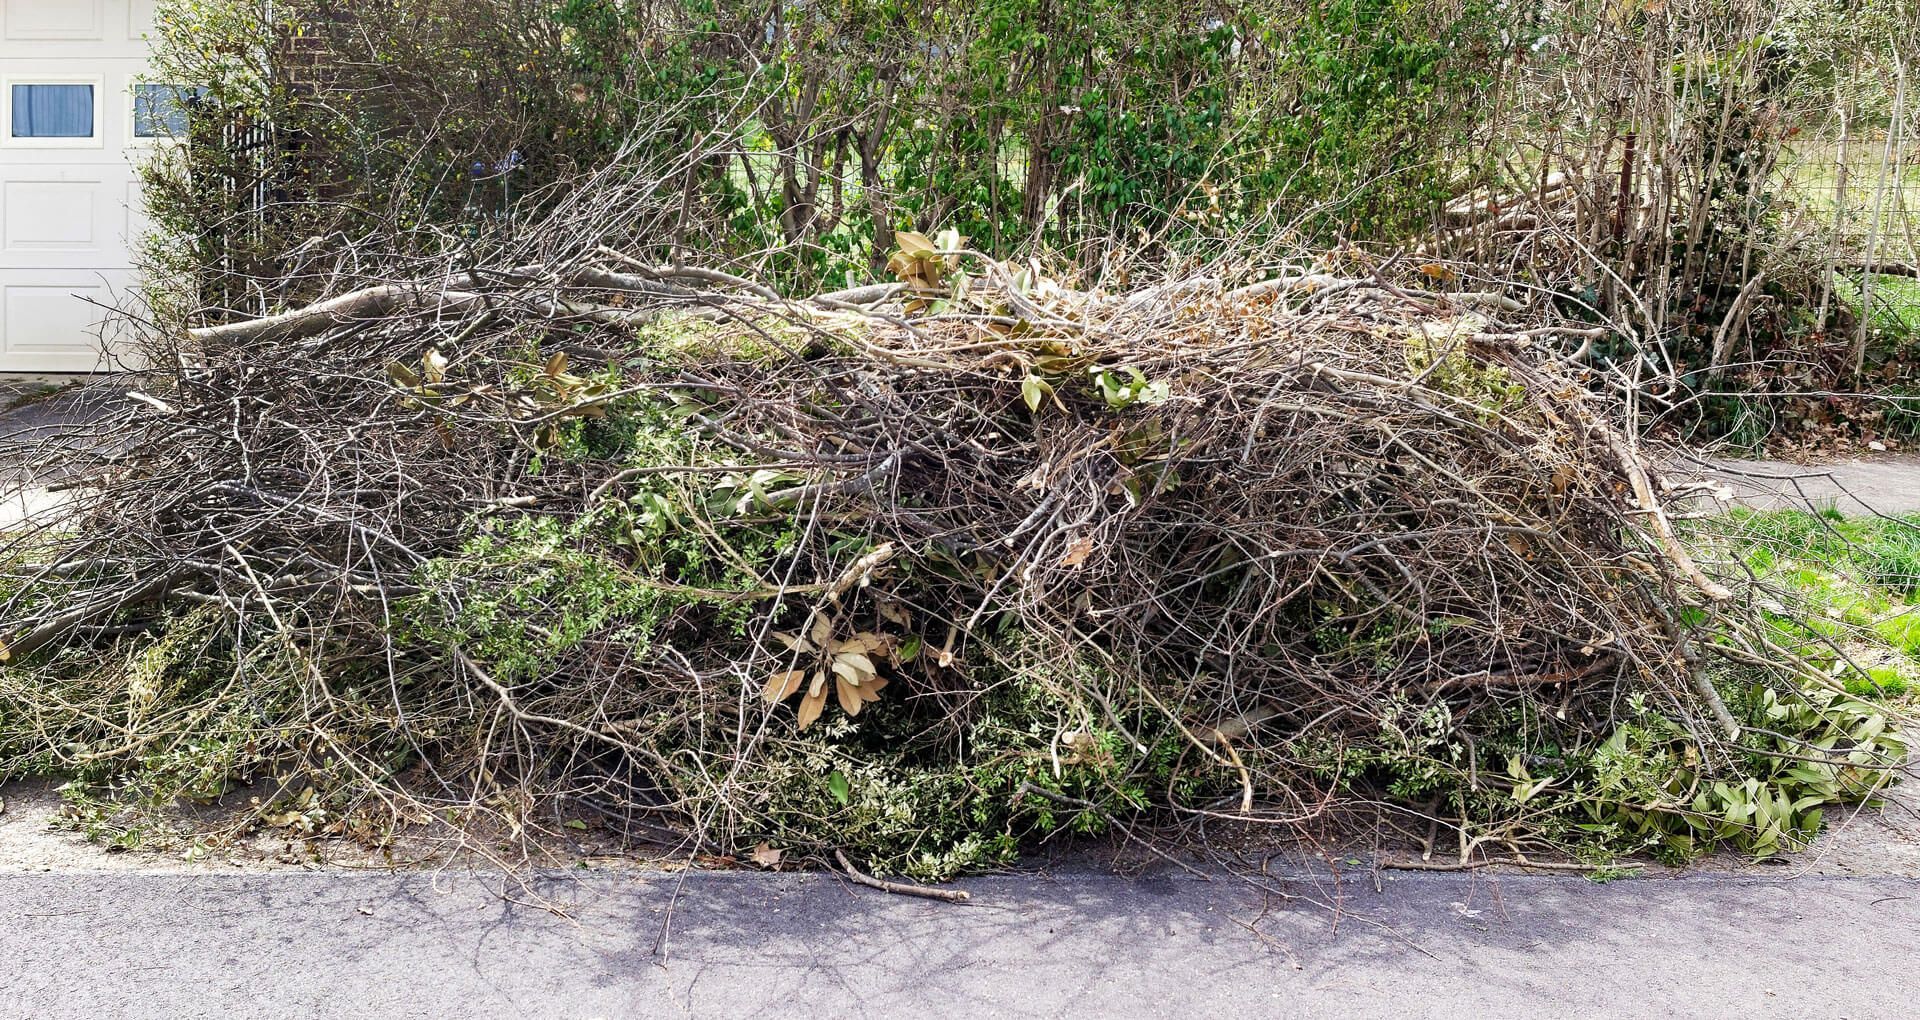 A pile of branches and leaves is sitting on the side of the road